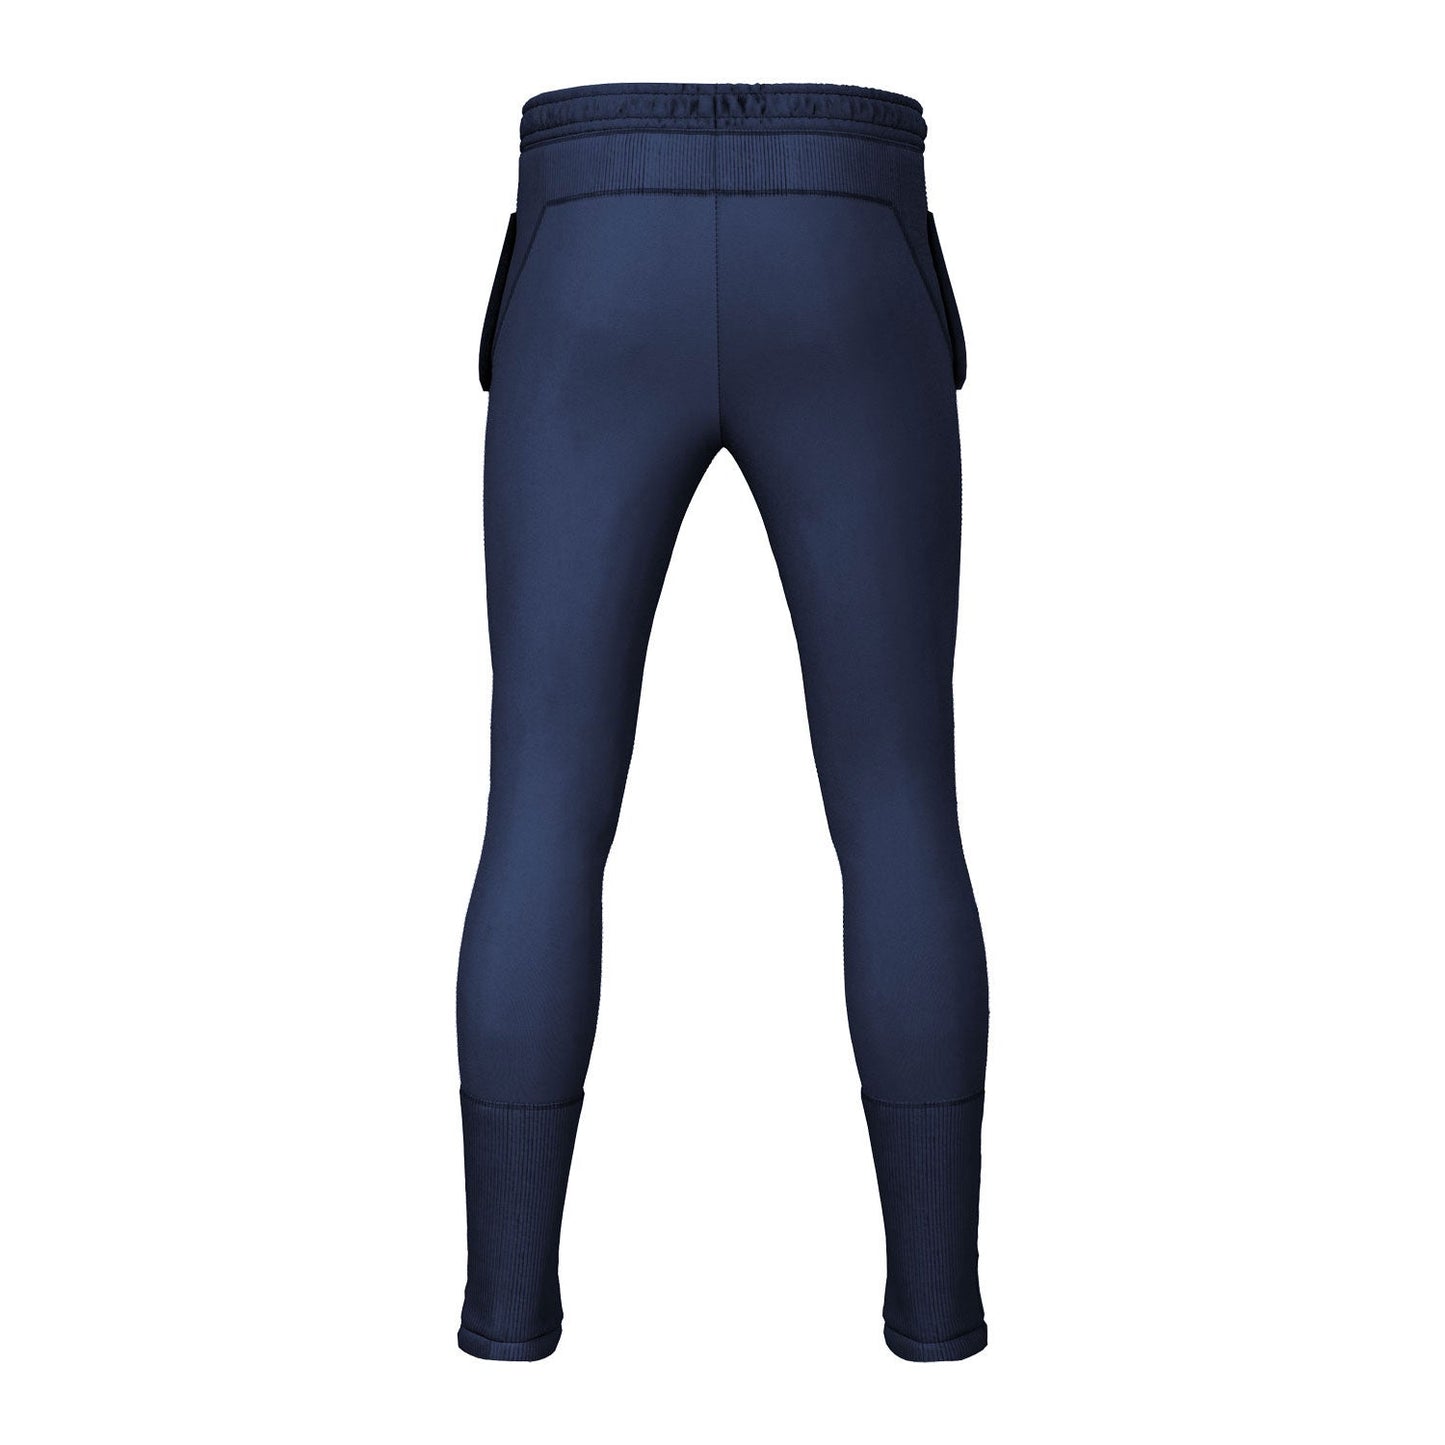 University College London Boat Club Skinny Tracksuit Trousers